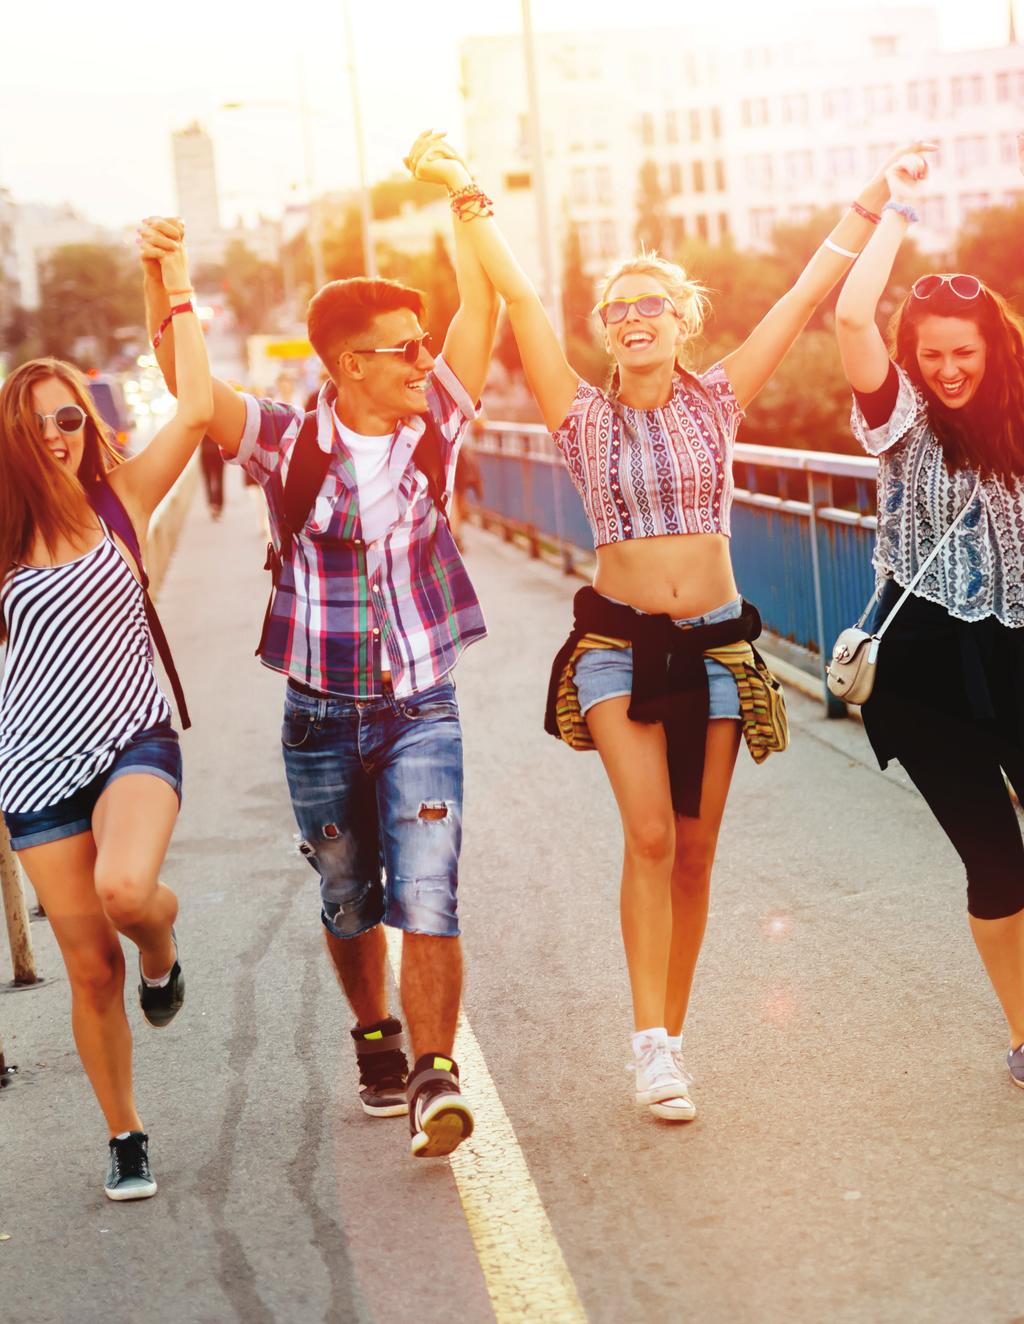 GENERATION Z VS. MILLENNIALS: THE CHANGING LANDSCAPE OF LOYALTY CONCLUSION Generation Z and Millennials have different attitudes towards brand loyalty.